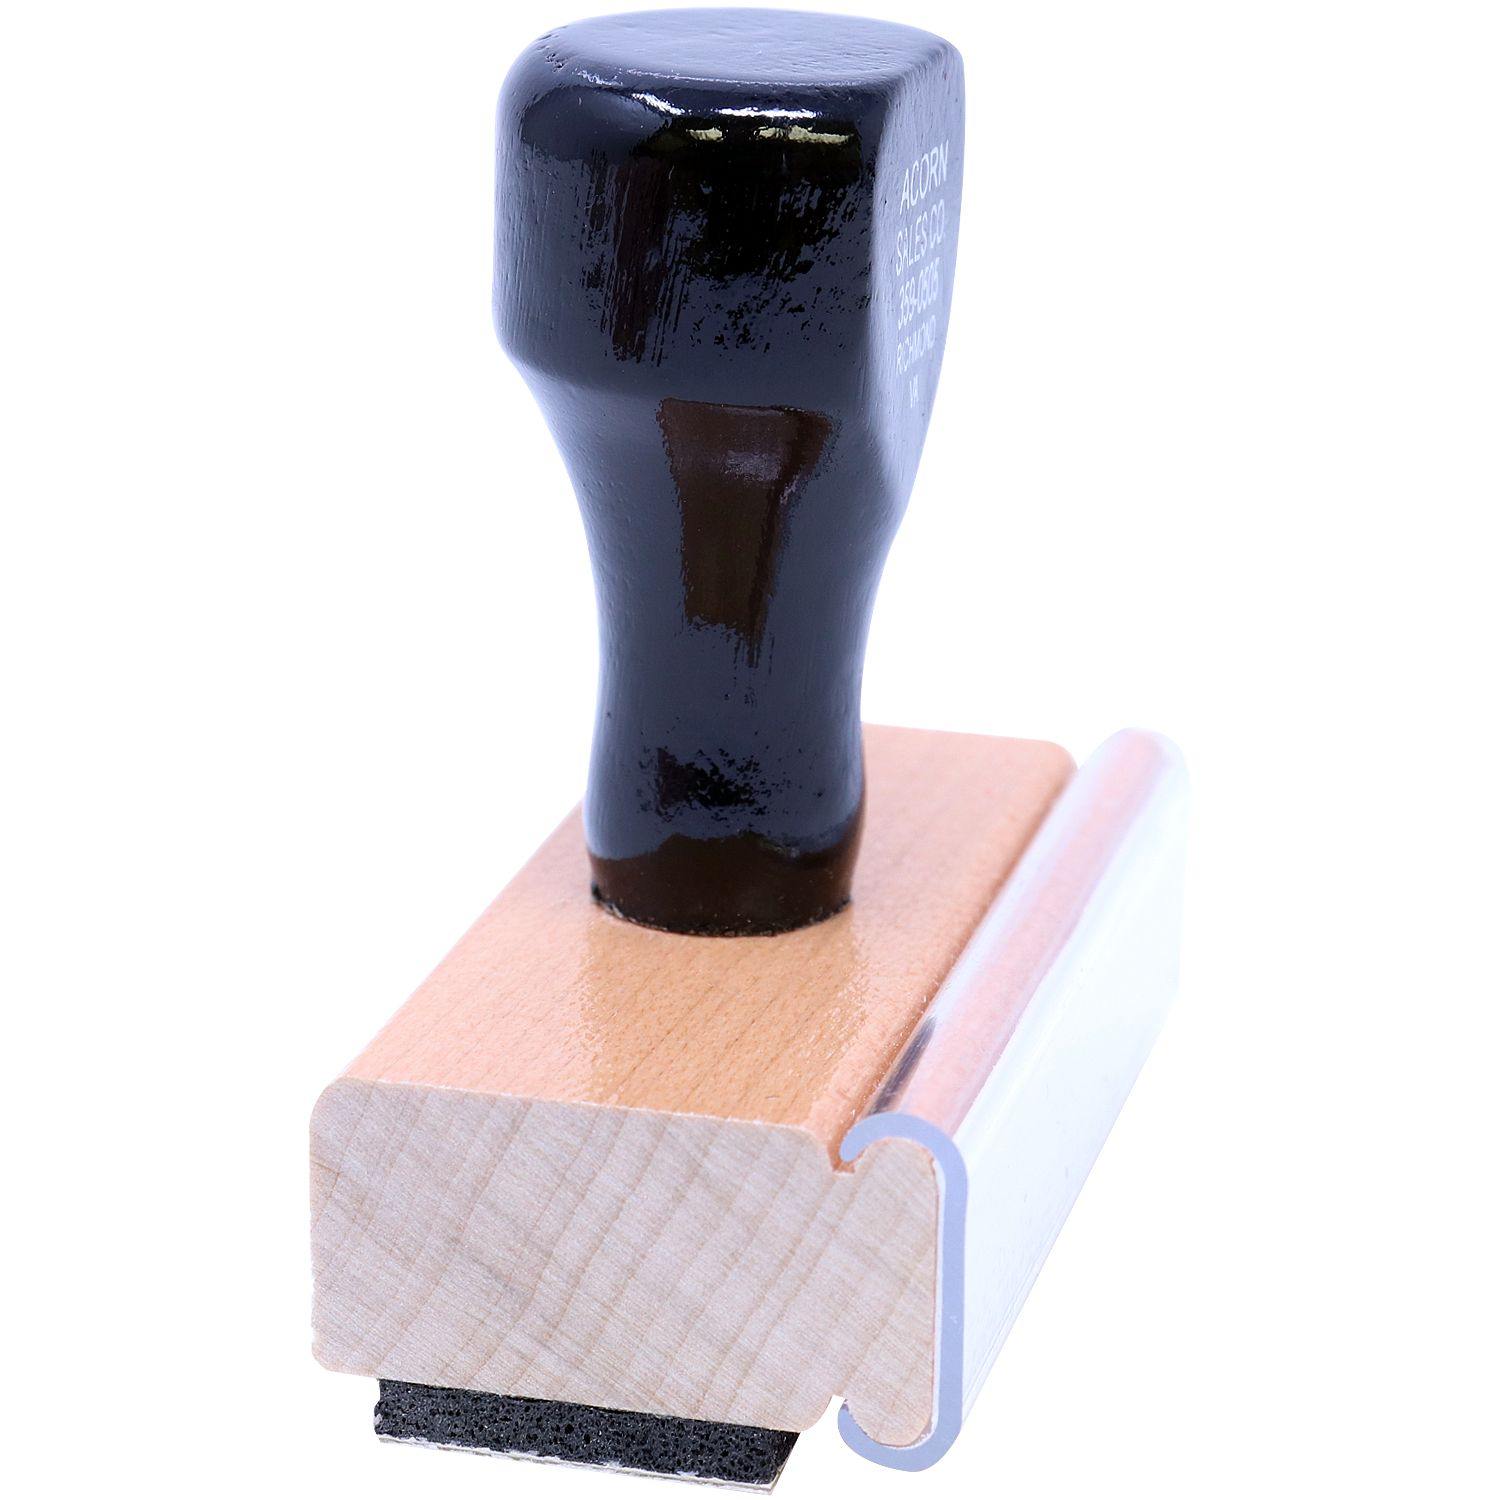 Side View of Large Narrow First Class Mail Rubber Stamp at an Angle